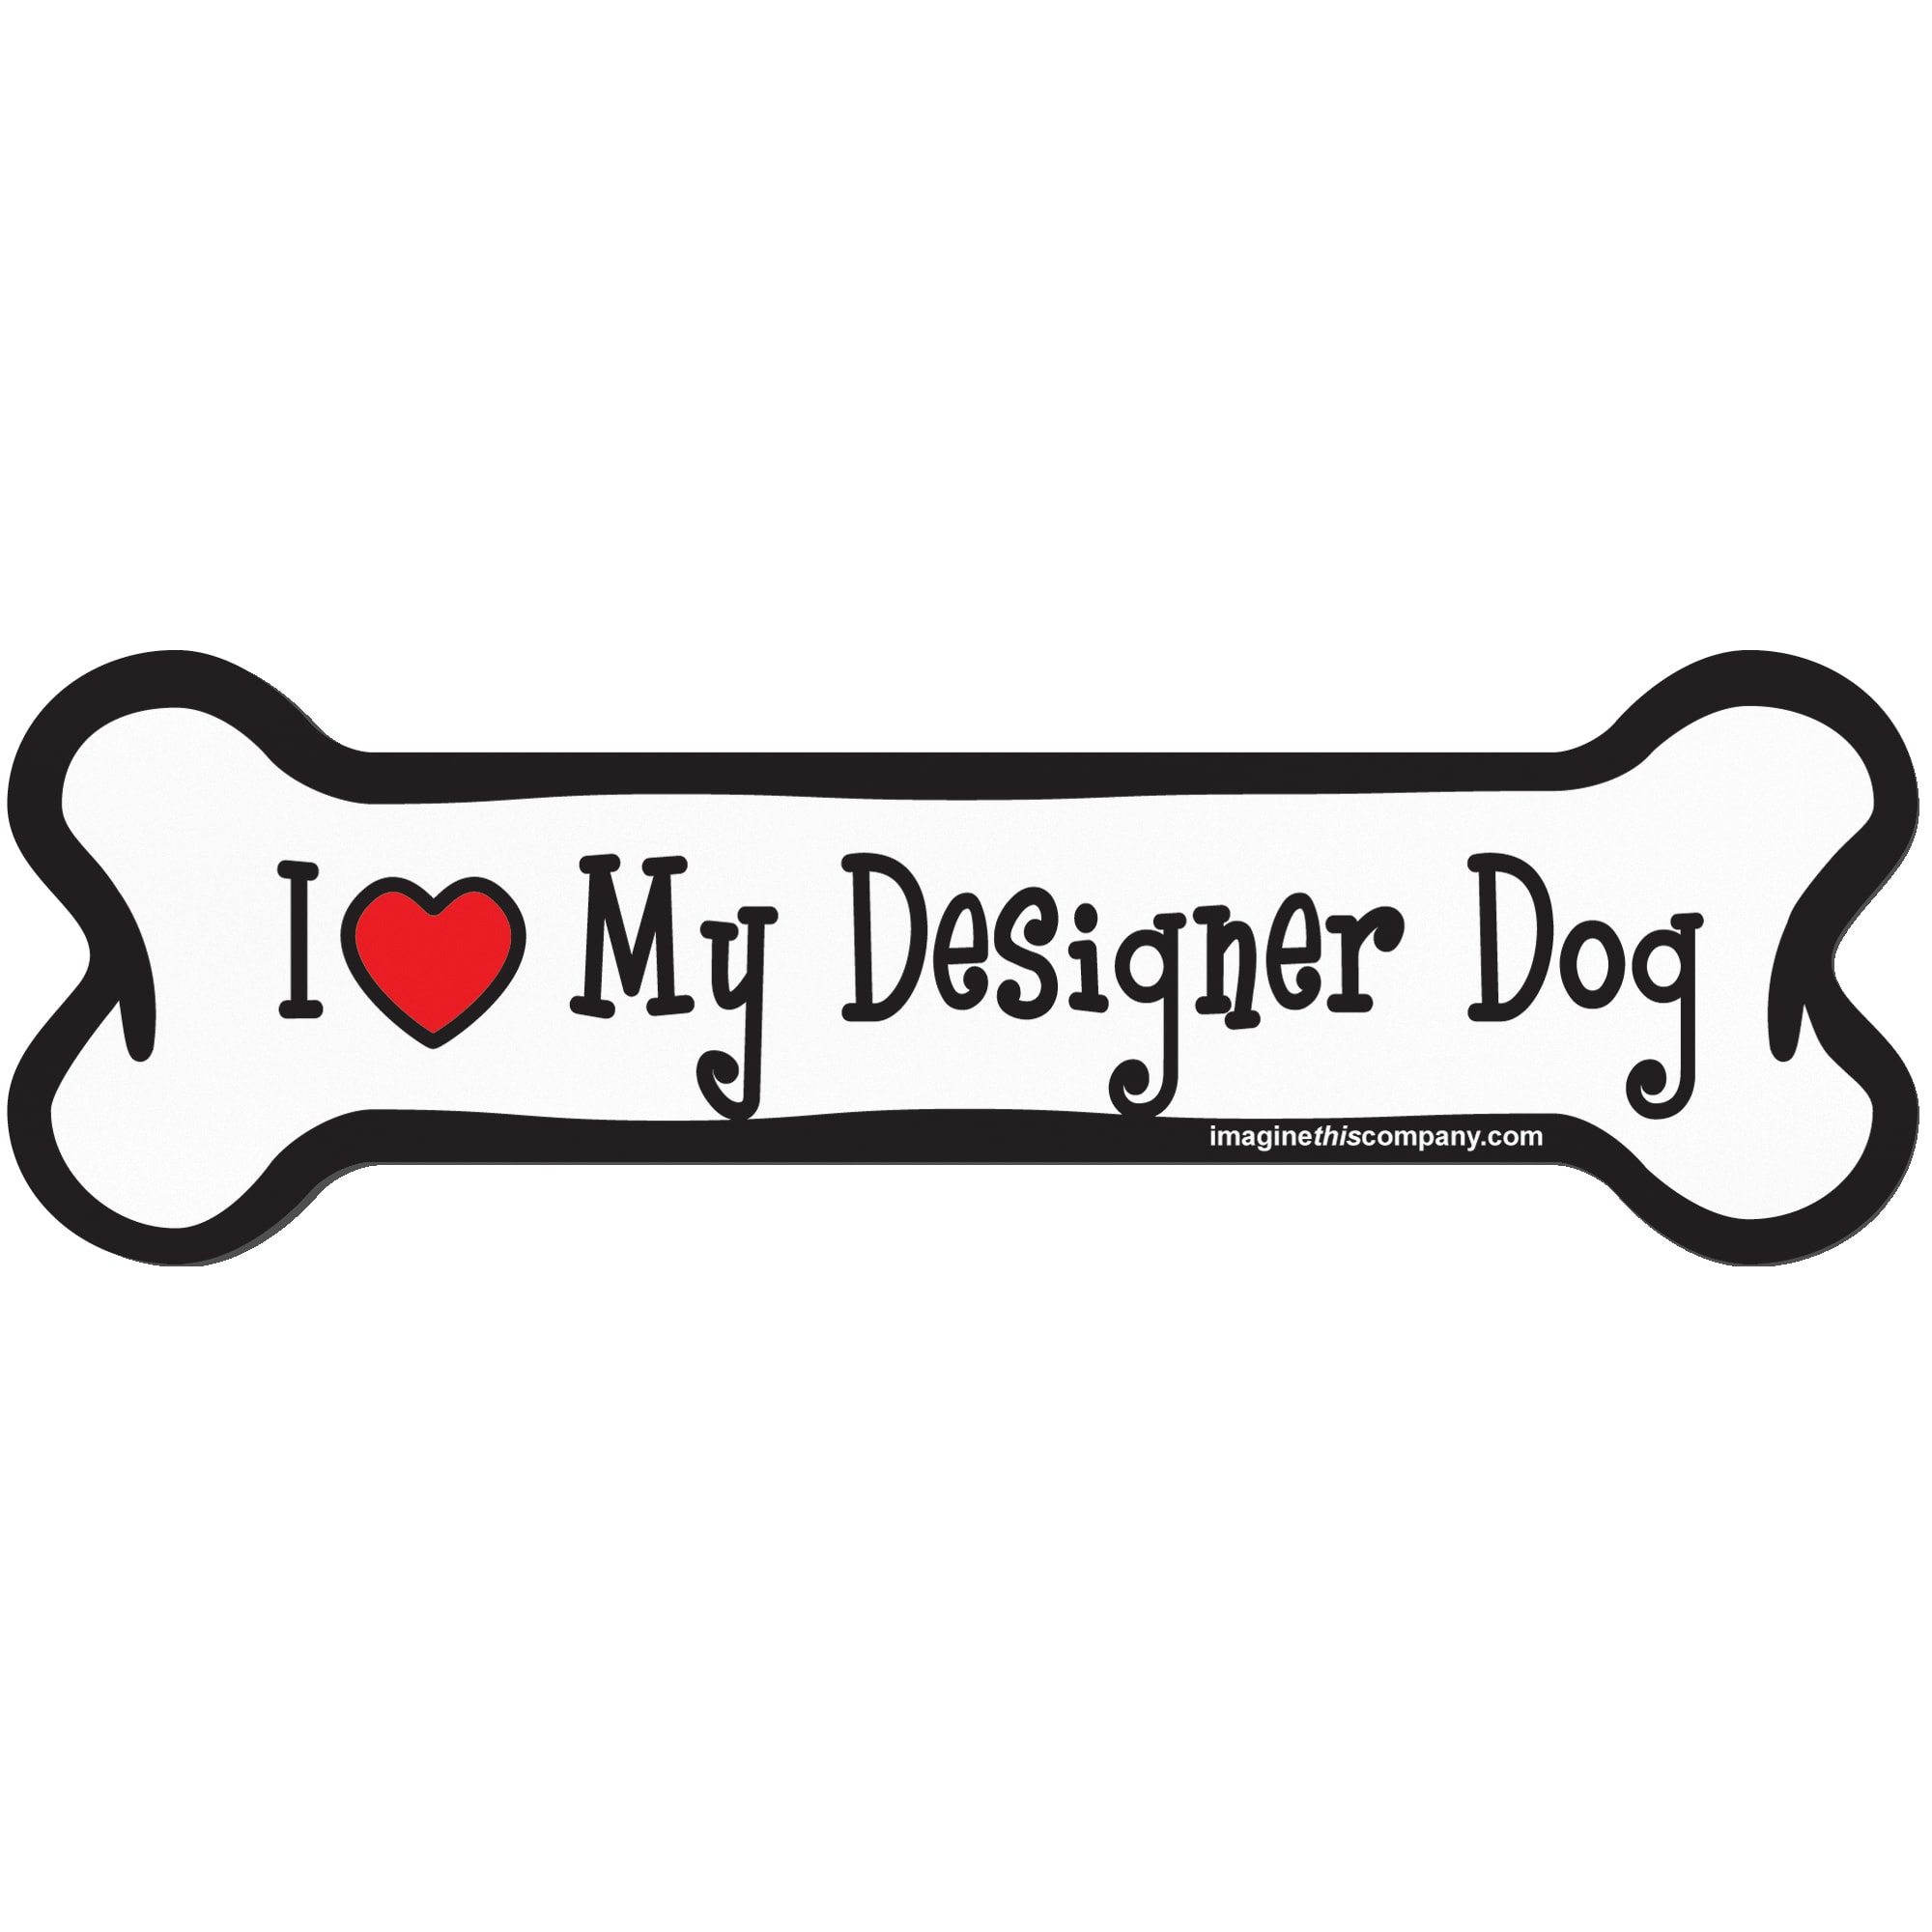 I Love My Boxer Imagine This Bone Car Magnet 2-Inch by 7-Inch 